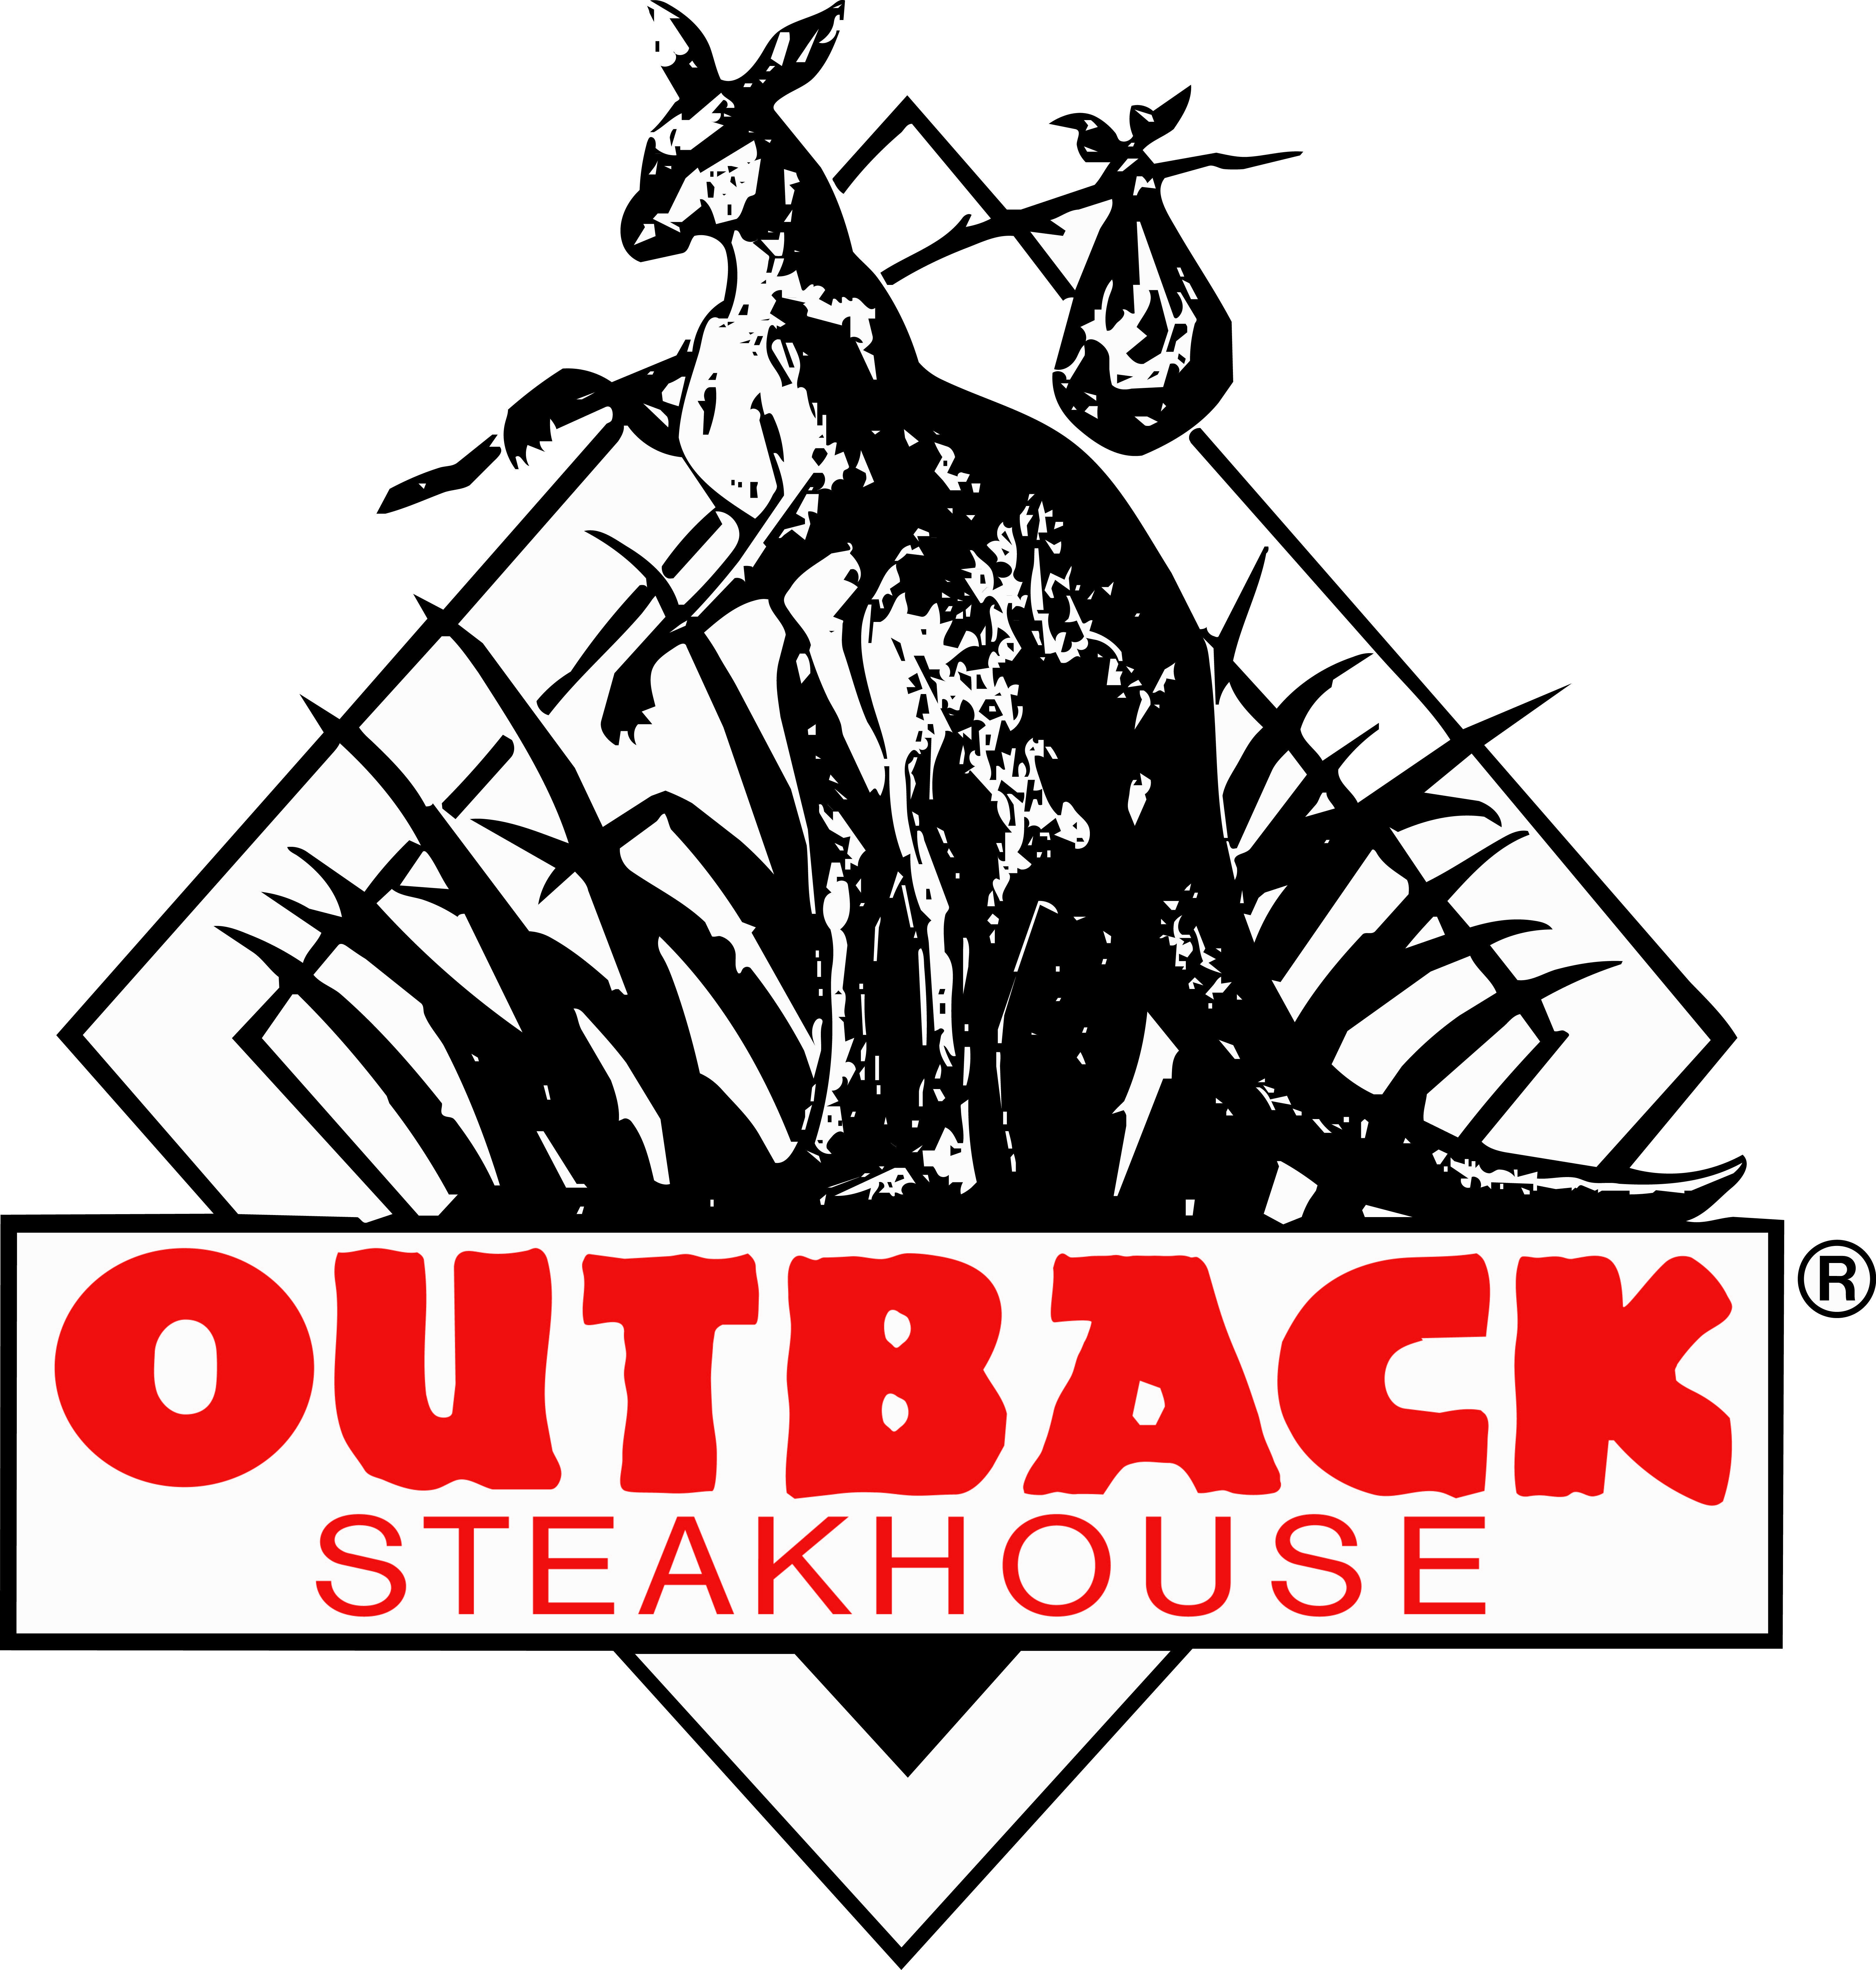 Outback Steakhouse Logo - Outback Steakhouse Islamorada: Best Deals, Discounts, Coupons ...